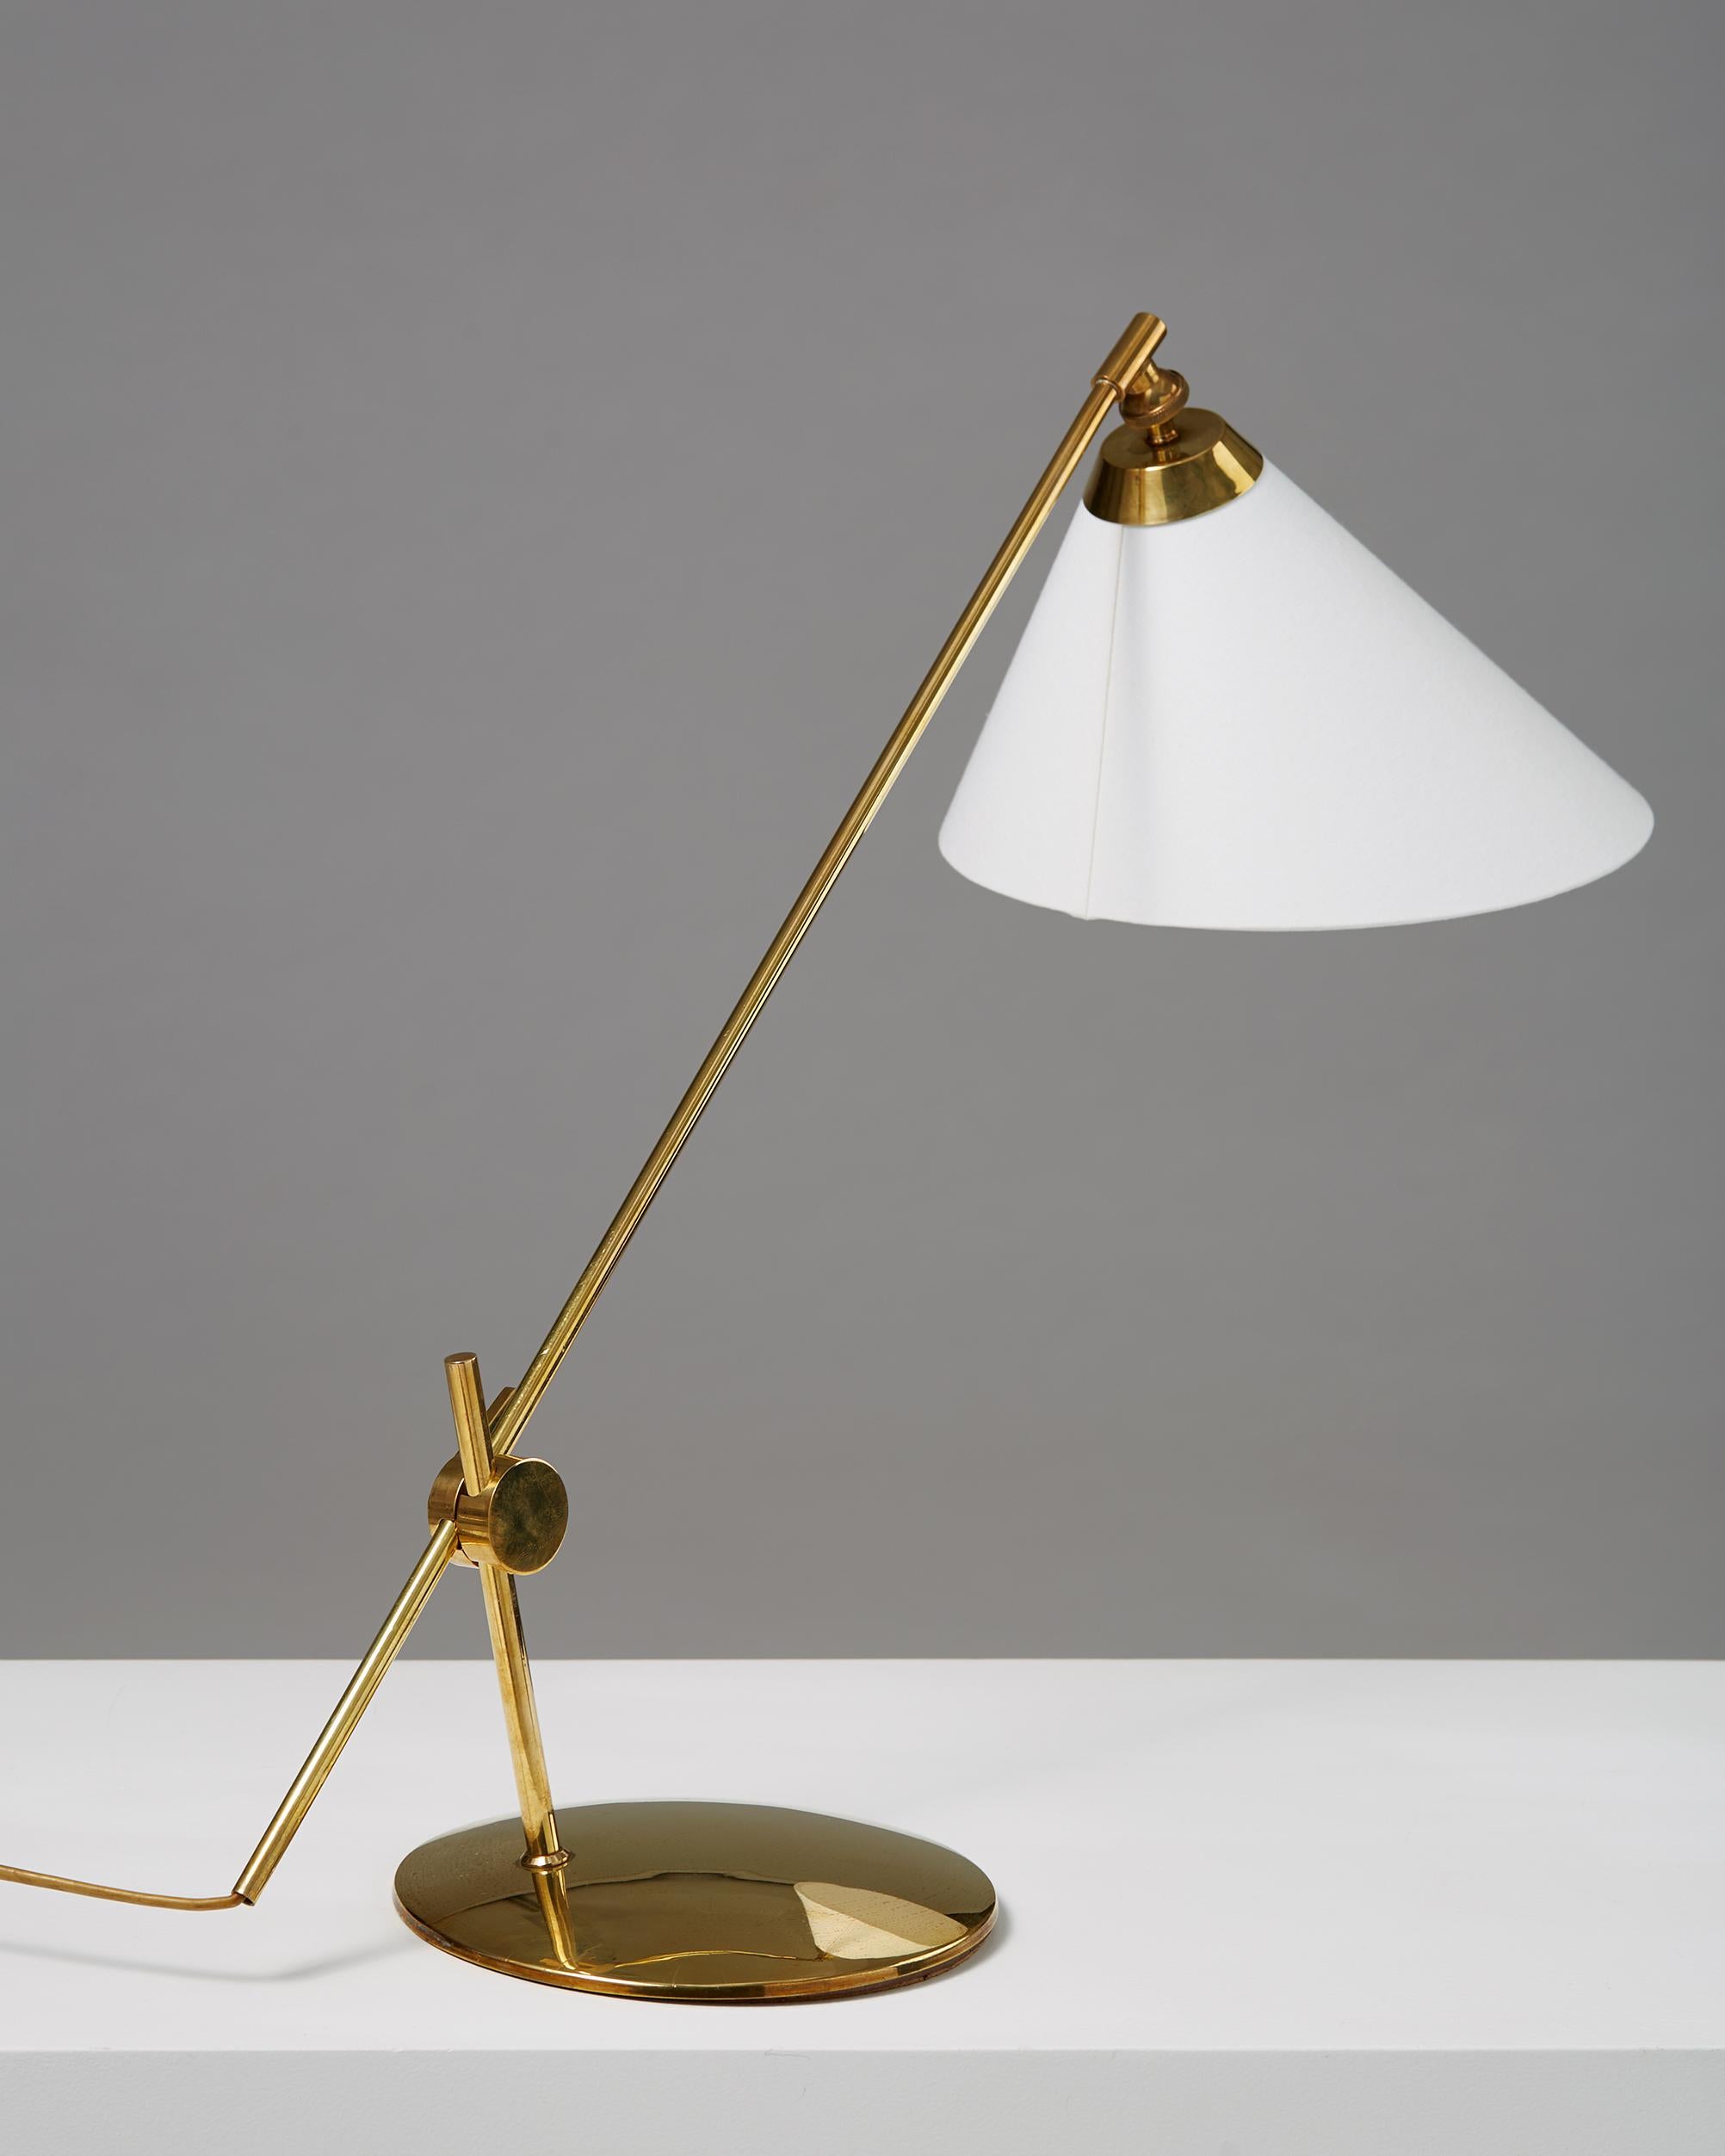 Adjustable desk or table lamp model THV-375. Brass and cotton shade.